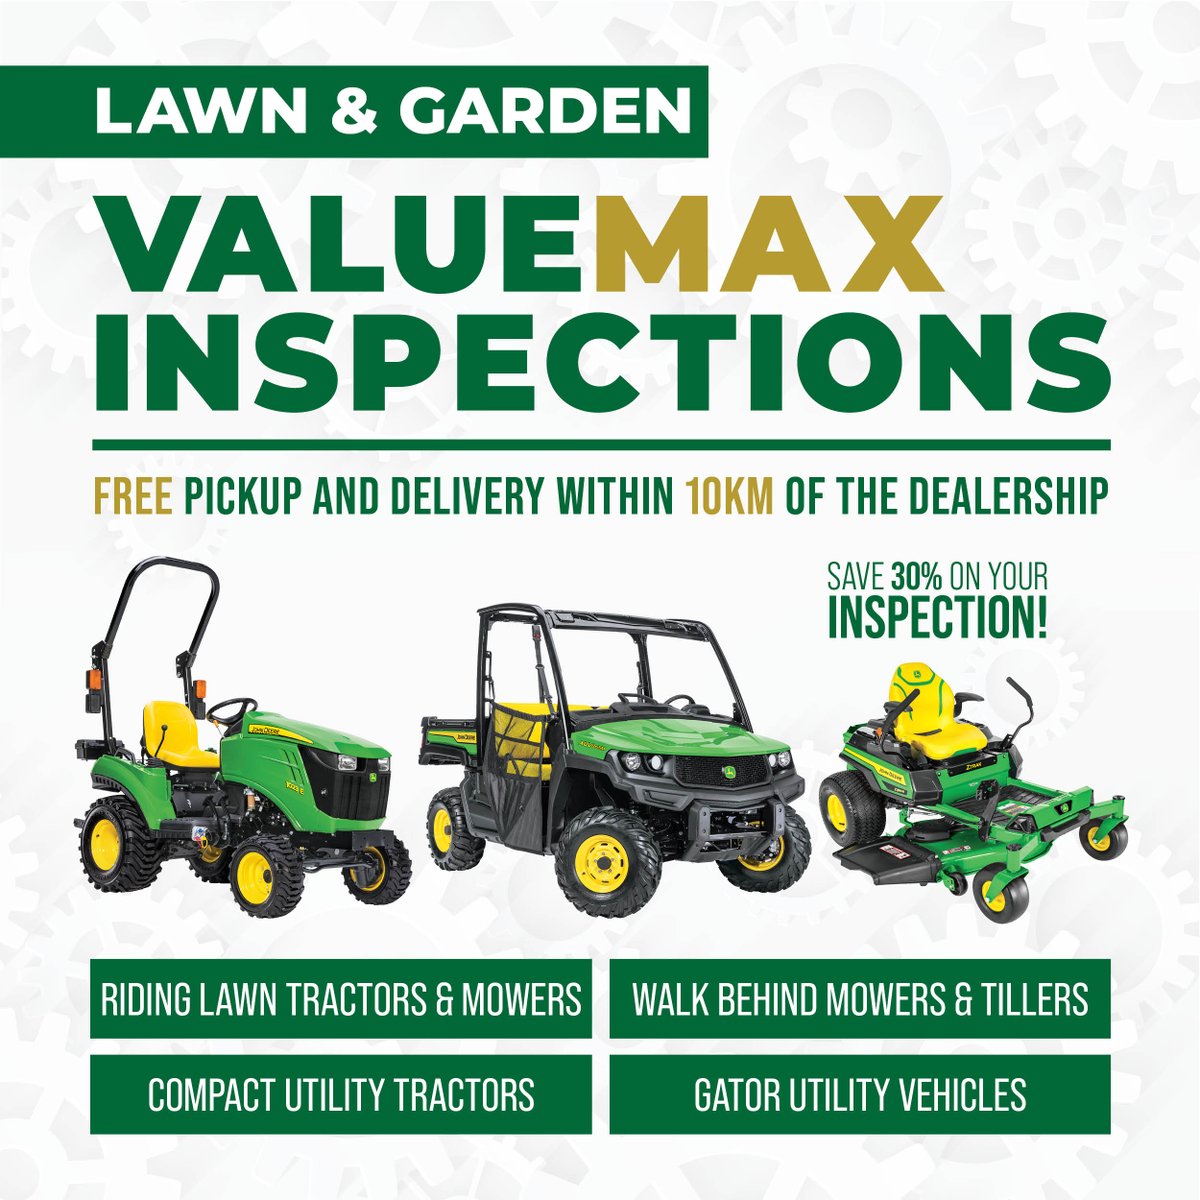 Free Pick Up and Delivery within 10KM of the dealership! Save 30% on your Lawn & Garden ValueMax Inspection! Book Today: ow.ly/bqaM50R8IMP #PattisonAg